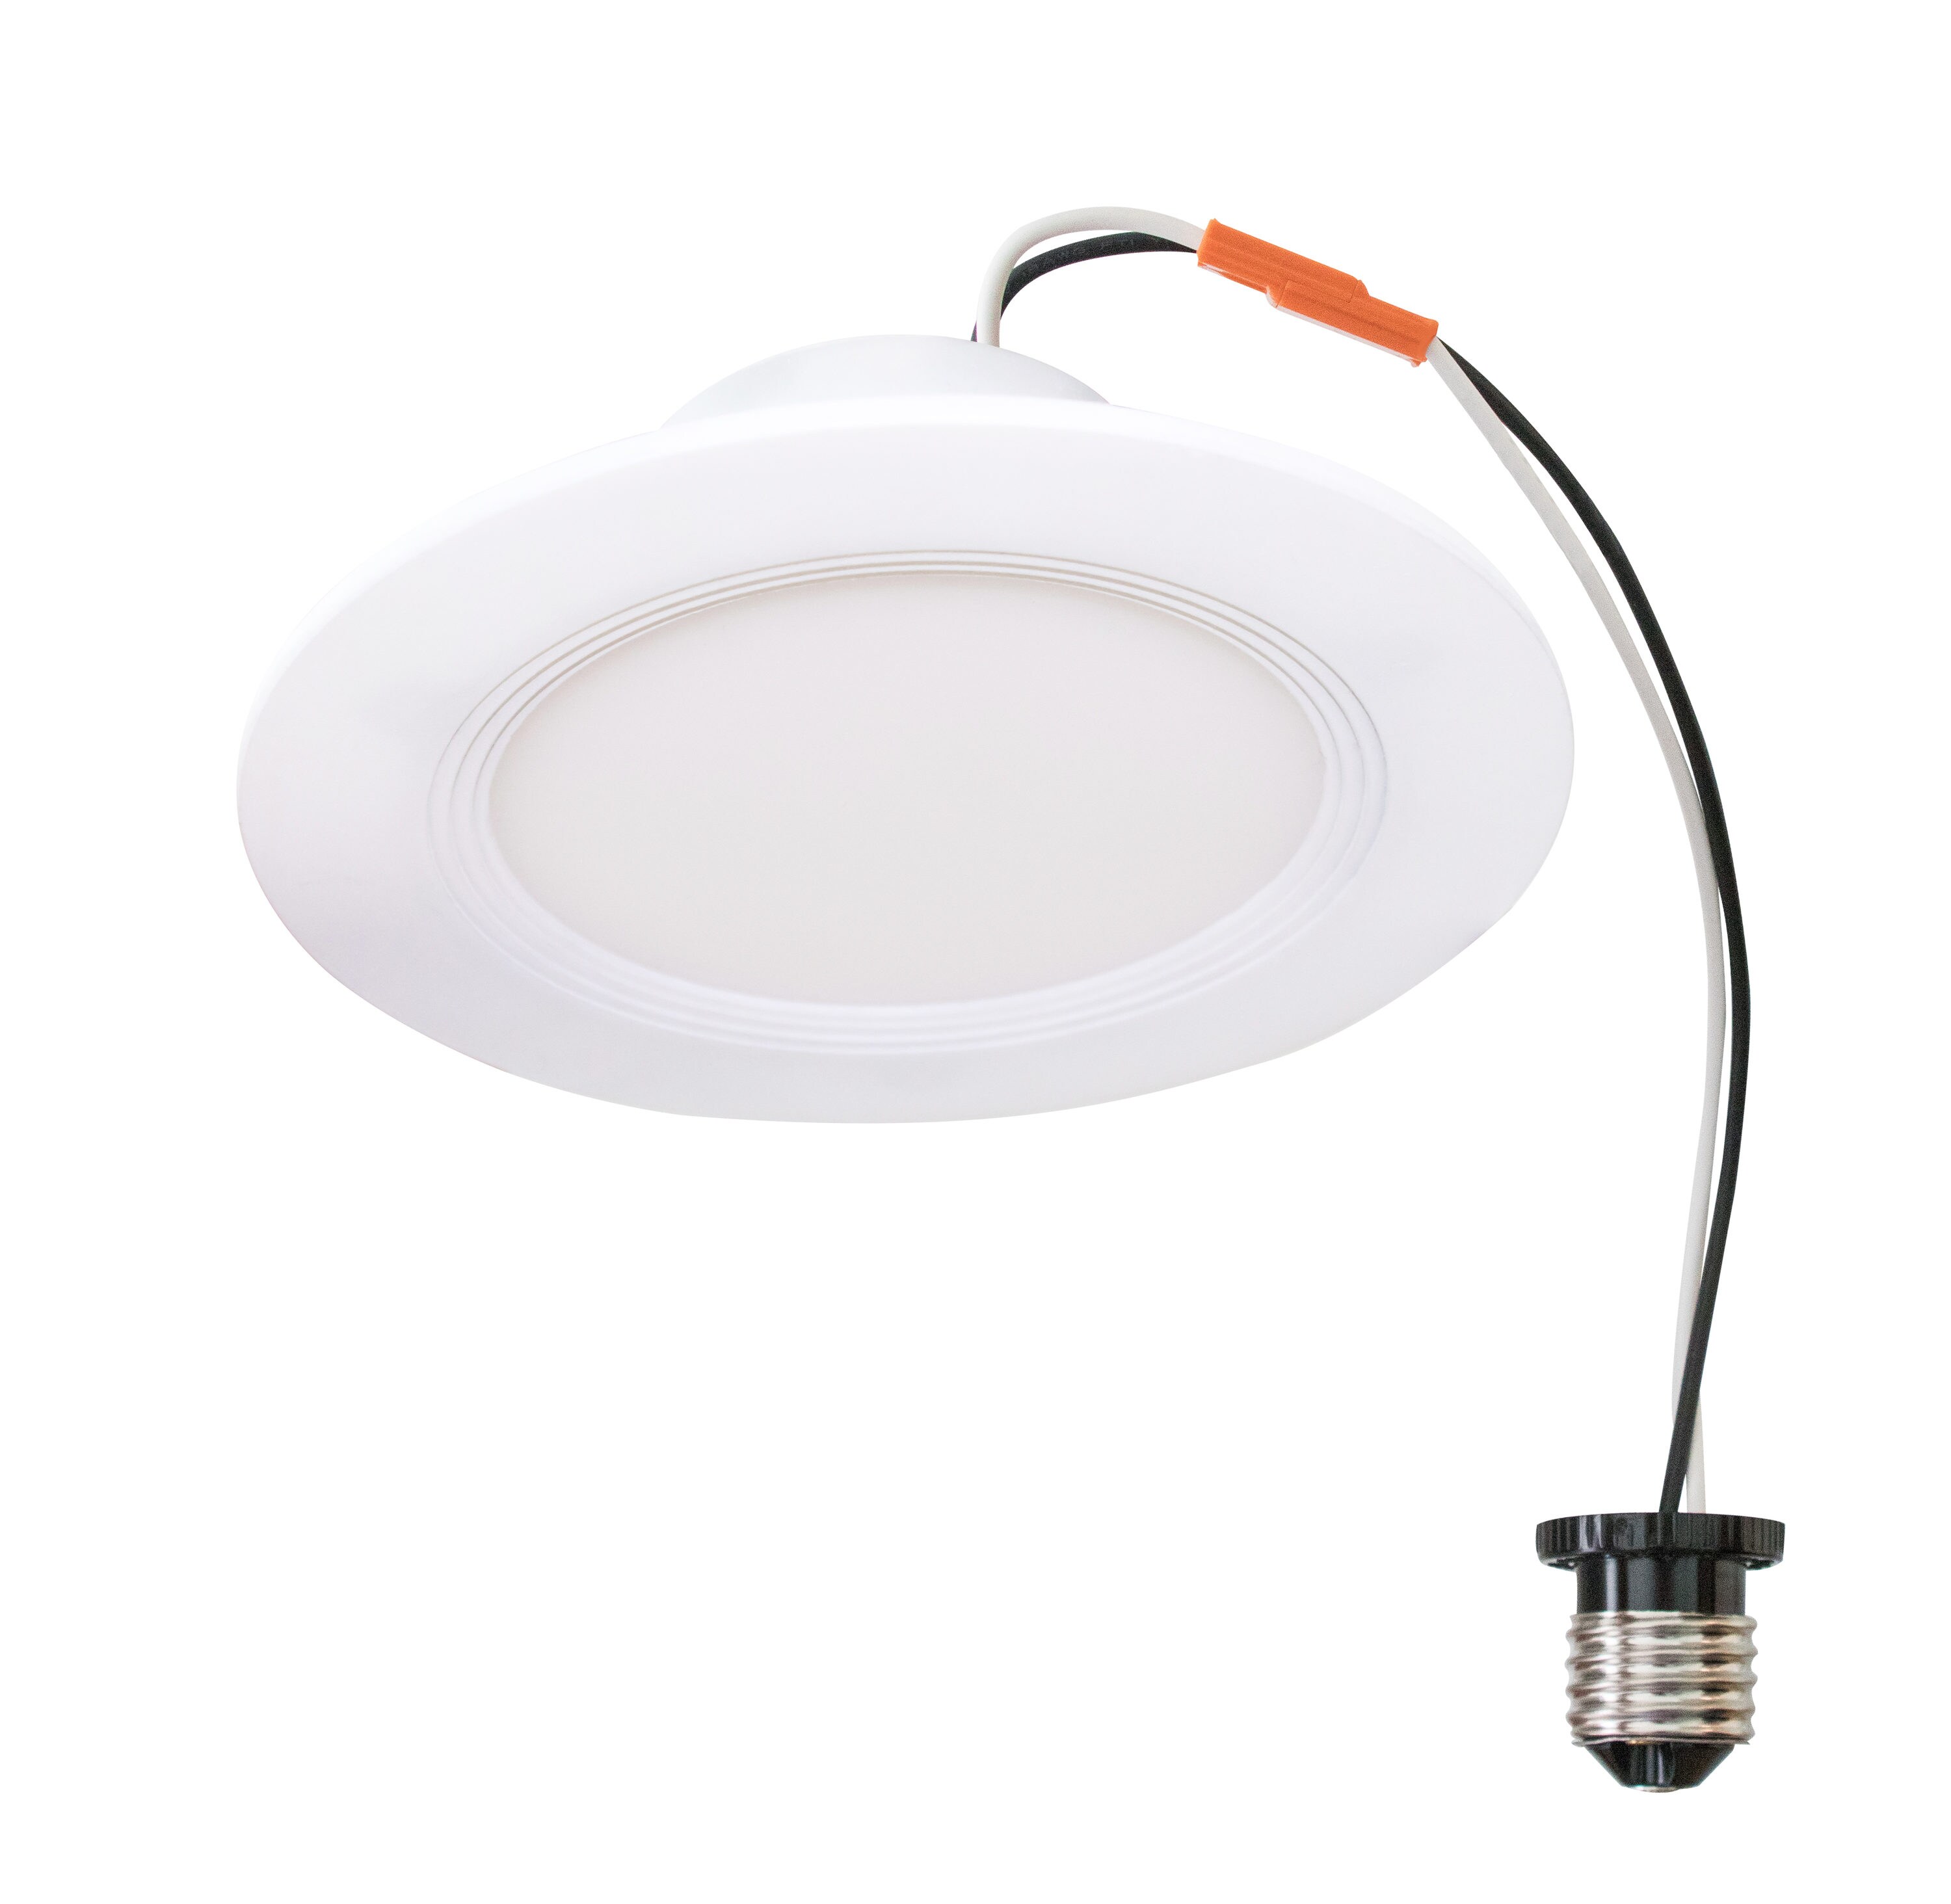 Fits Housing Diameter: 4-in Utilitech 50W Equivalent White Dimmable LED Recessed Retrofit Downlight BSW-980044-UT 